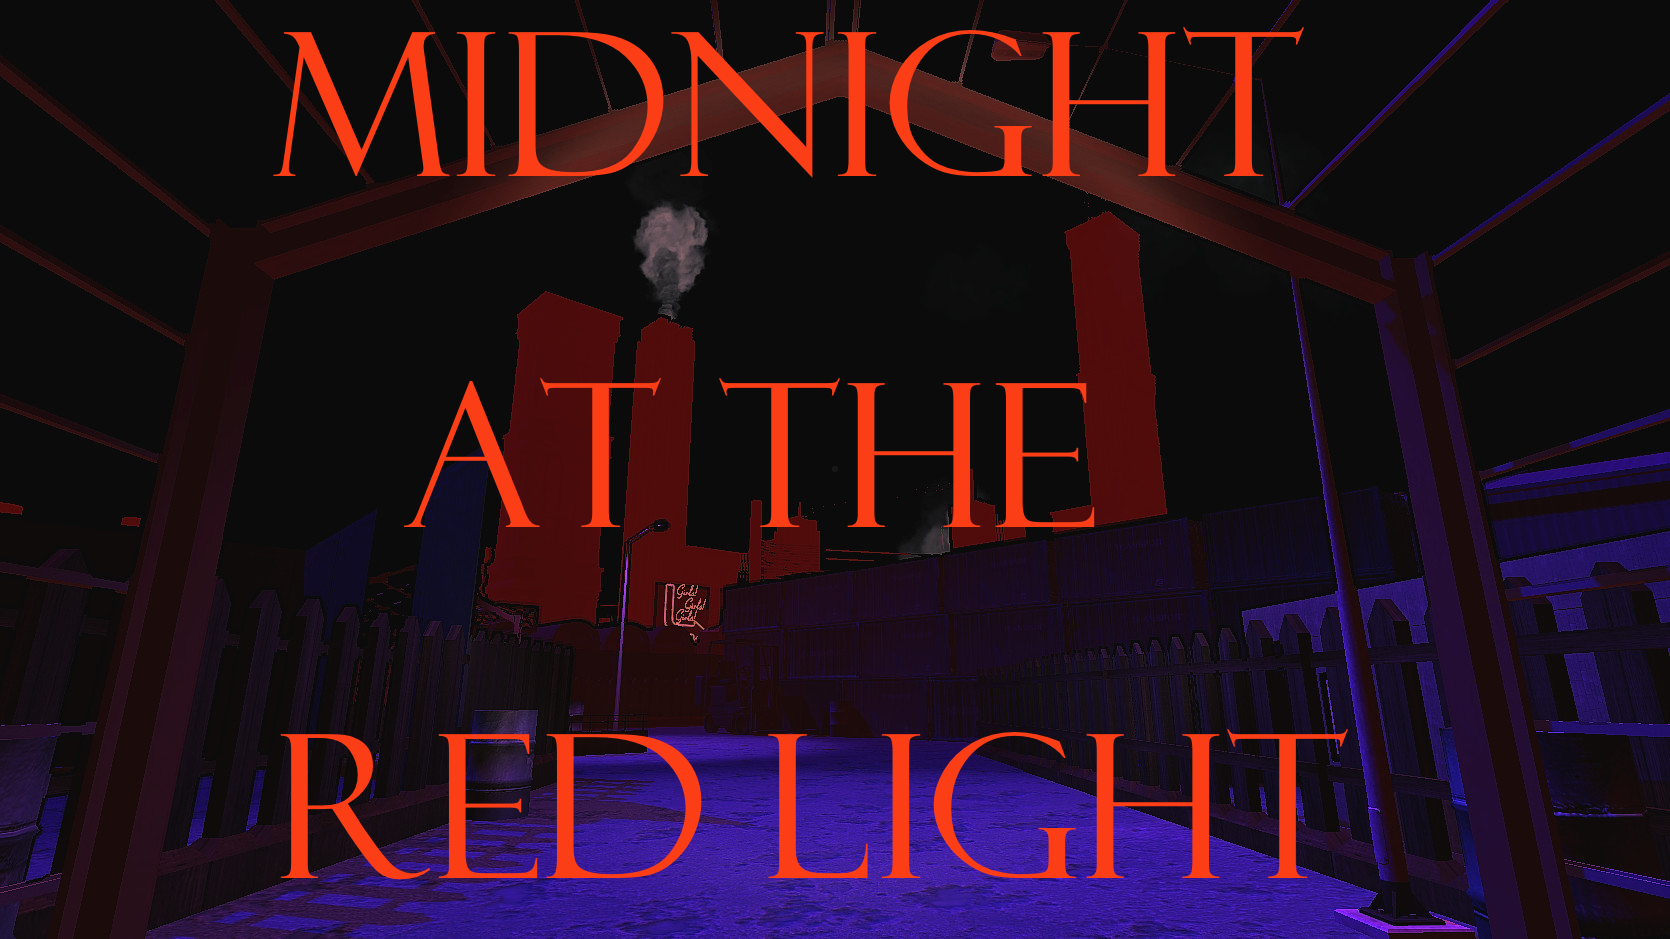 MIDNIGHT AT THE RED LIGHT (free game)